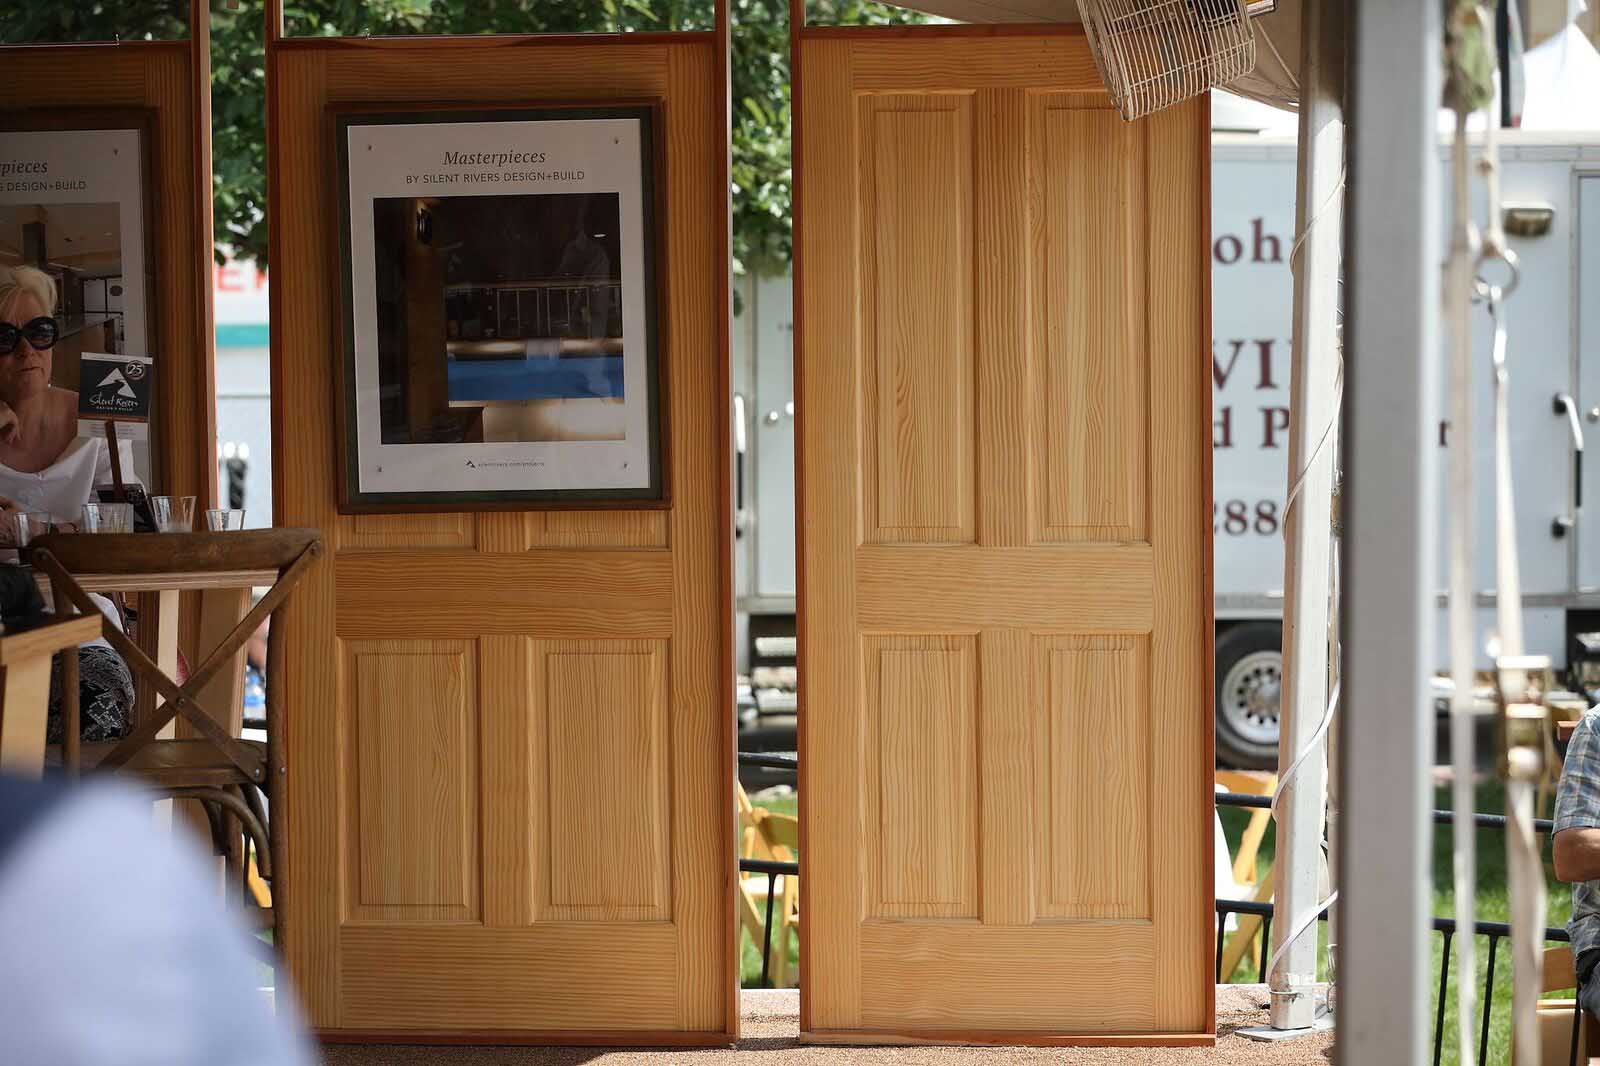 Silent Rivers VIP Club at 2018 Des Moines Arts Festival with sustainable materials and old doors